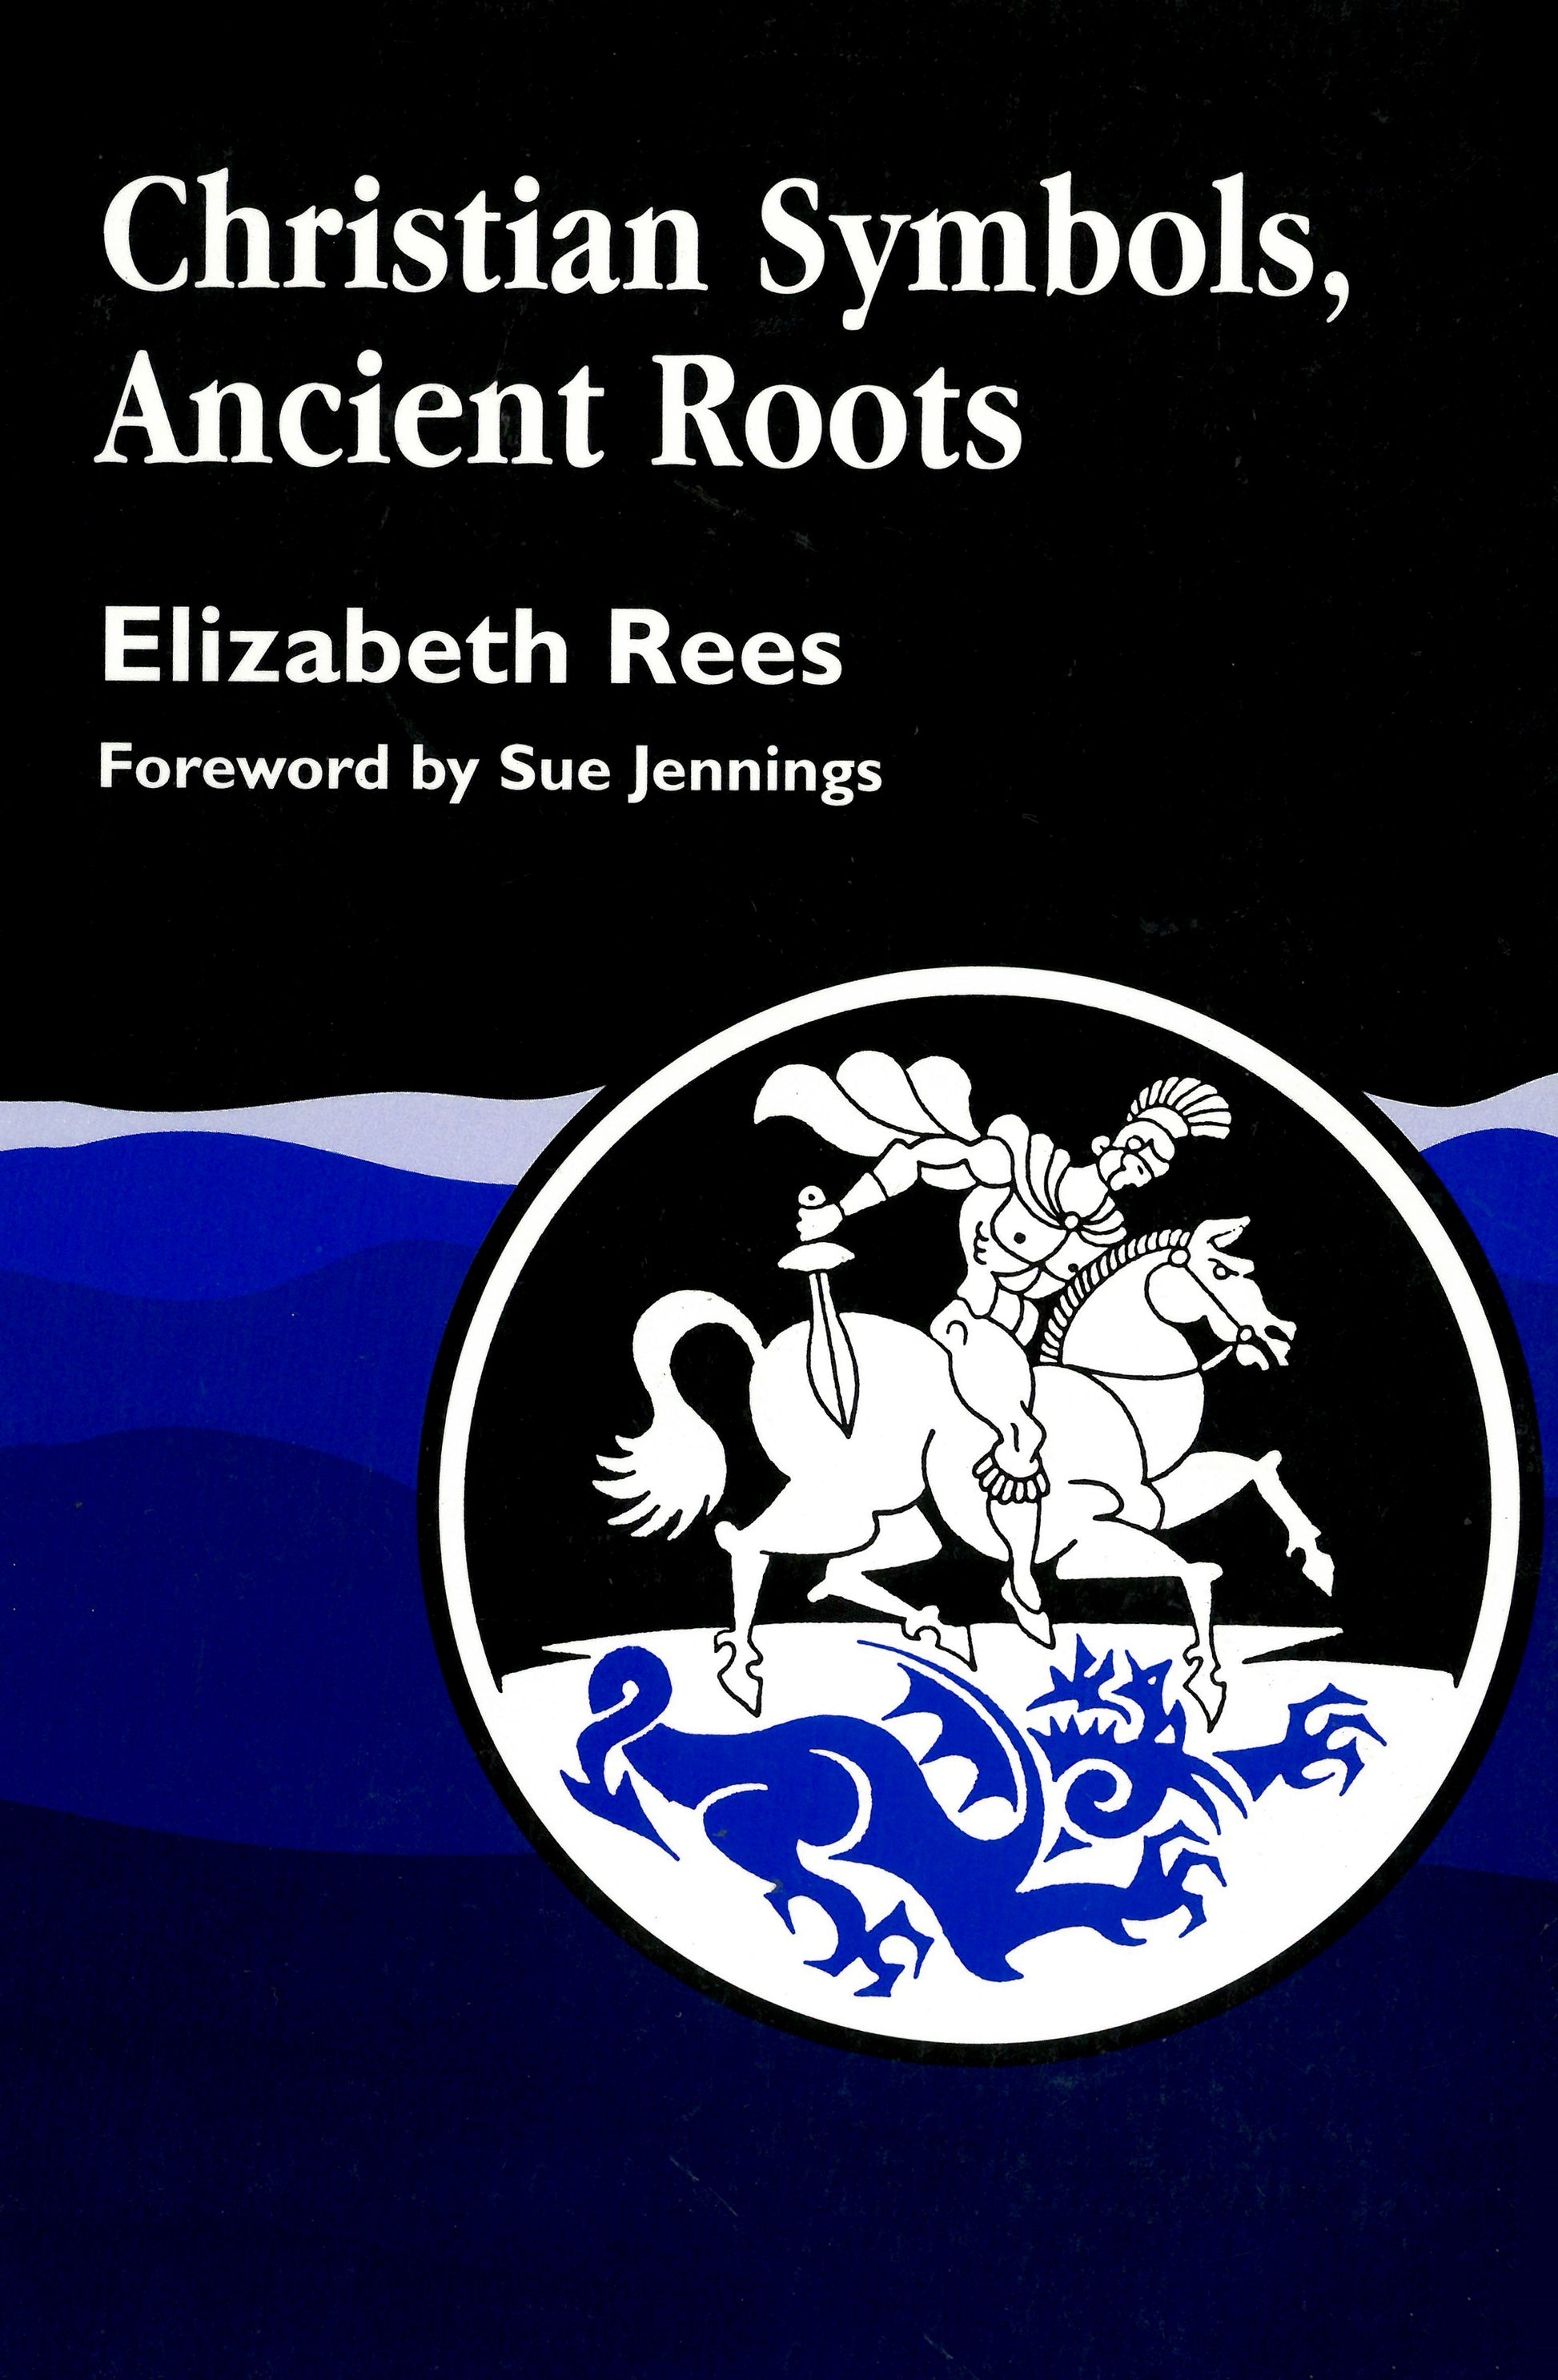 Christian Symbols, Ancient Roots by Elizabeth Rees